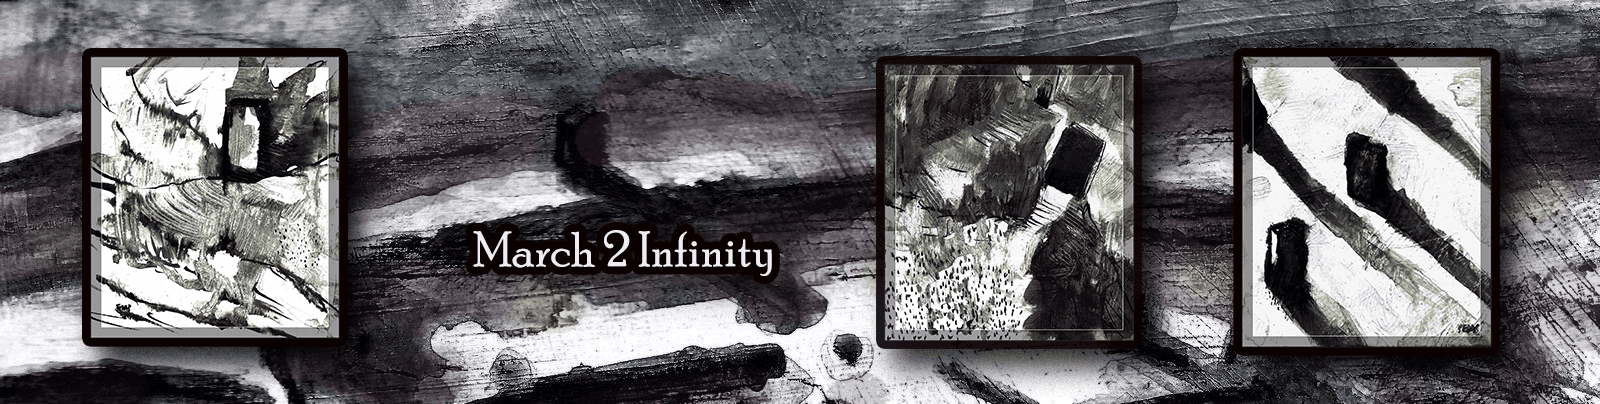 March 2 Infinity - Visions